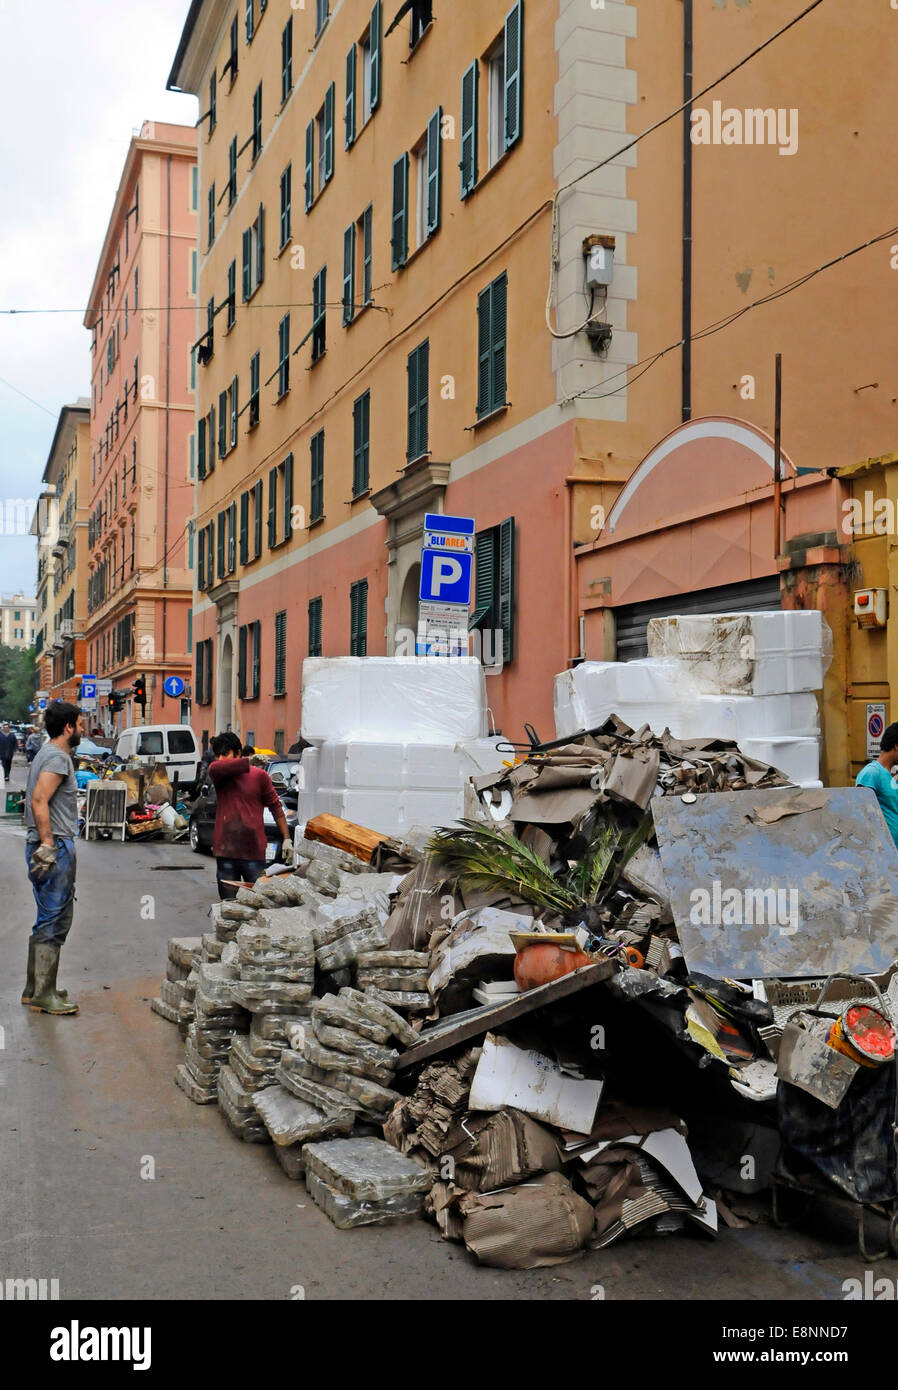 Genoa, Italy. 11th Oct, 2014. Aftermath of the flooding. At least one person died when flash floods swept through the northwestern Italian city of Genoa. Shop windows were smashed, cars washed aside and many streets were left knee deep in muddy water. © Massimo Piacentino/Alamy Live News Stock Photo